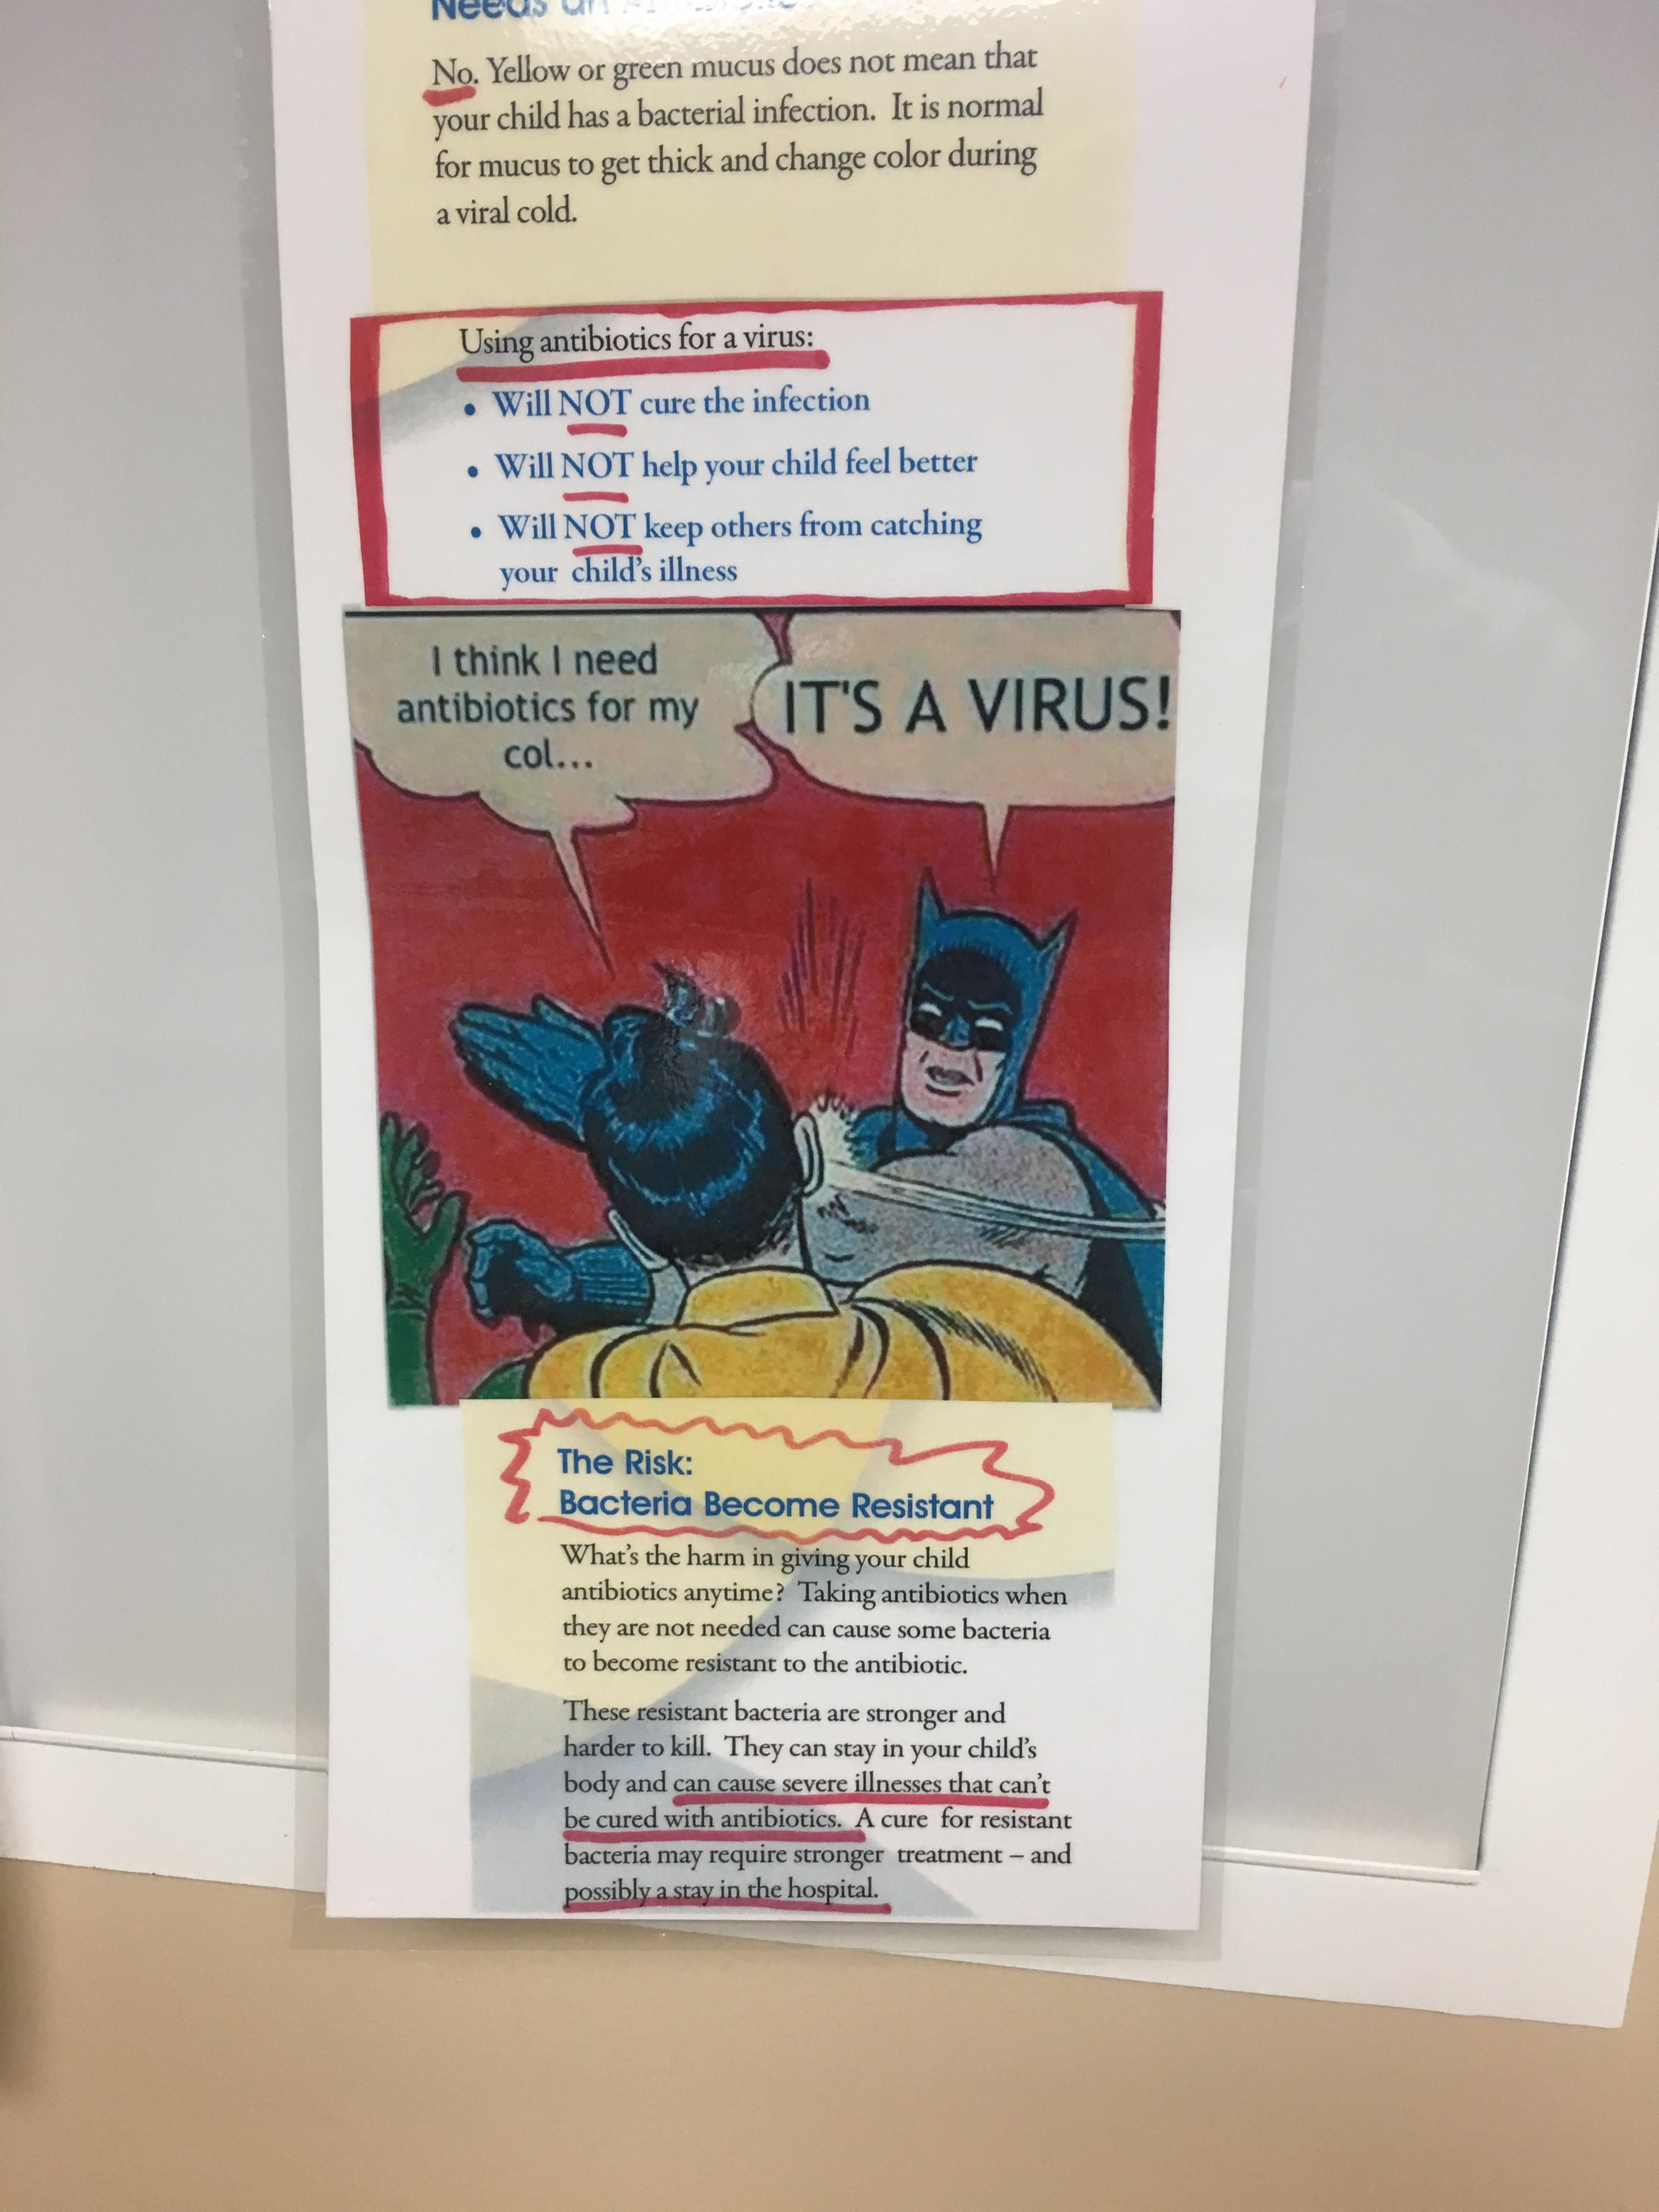 "Pediatrician had this posted"